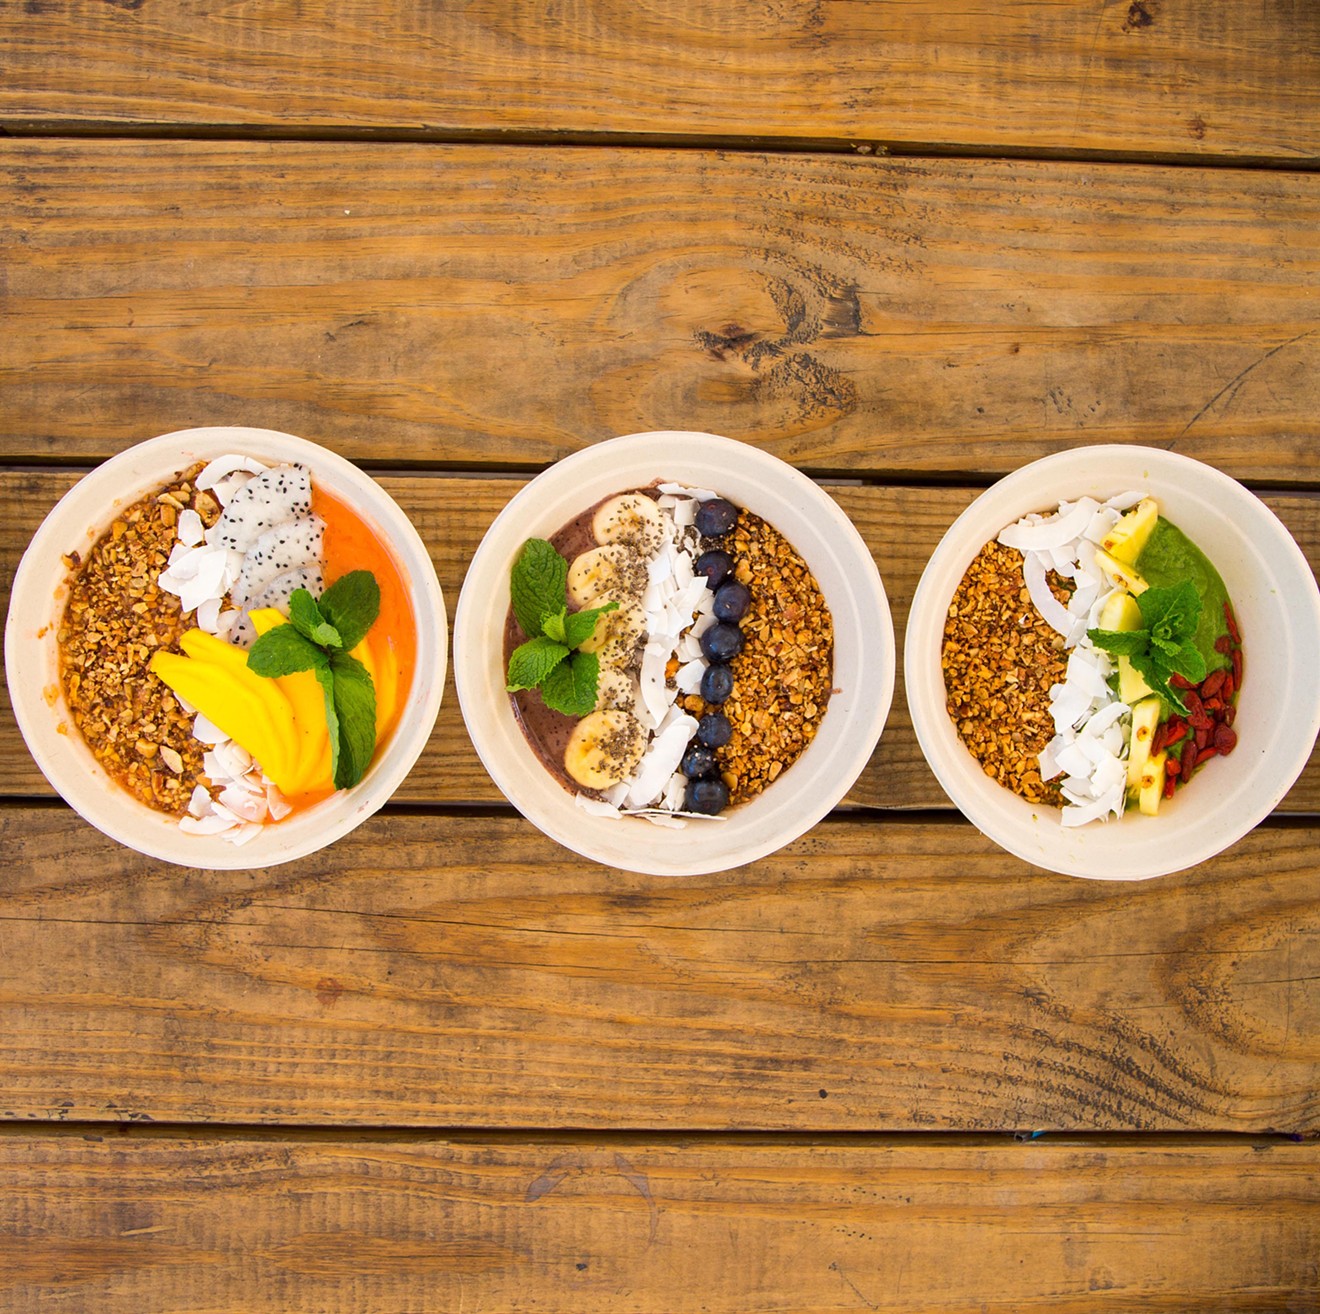 Visit the Yard for breakfast at Koba, which serves granola and fruit inside coconut-shell bowls.